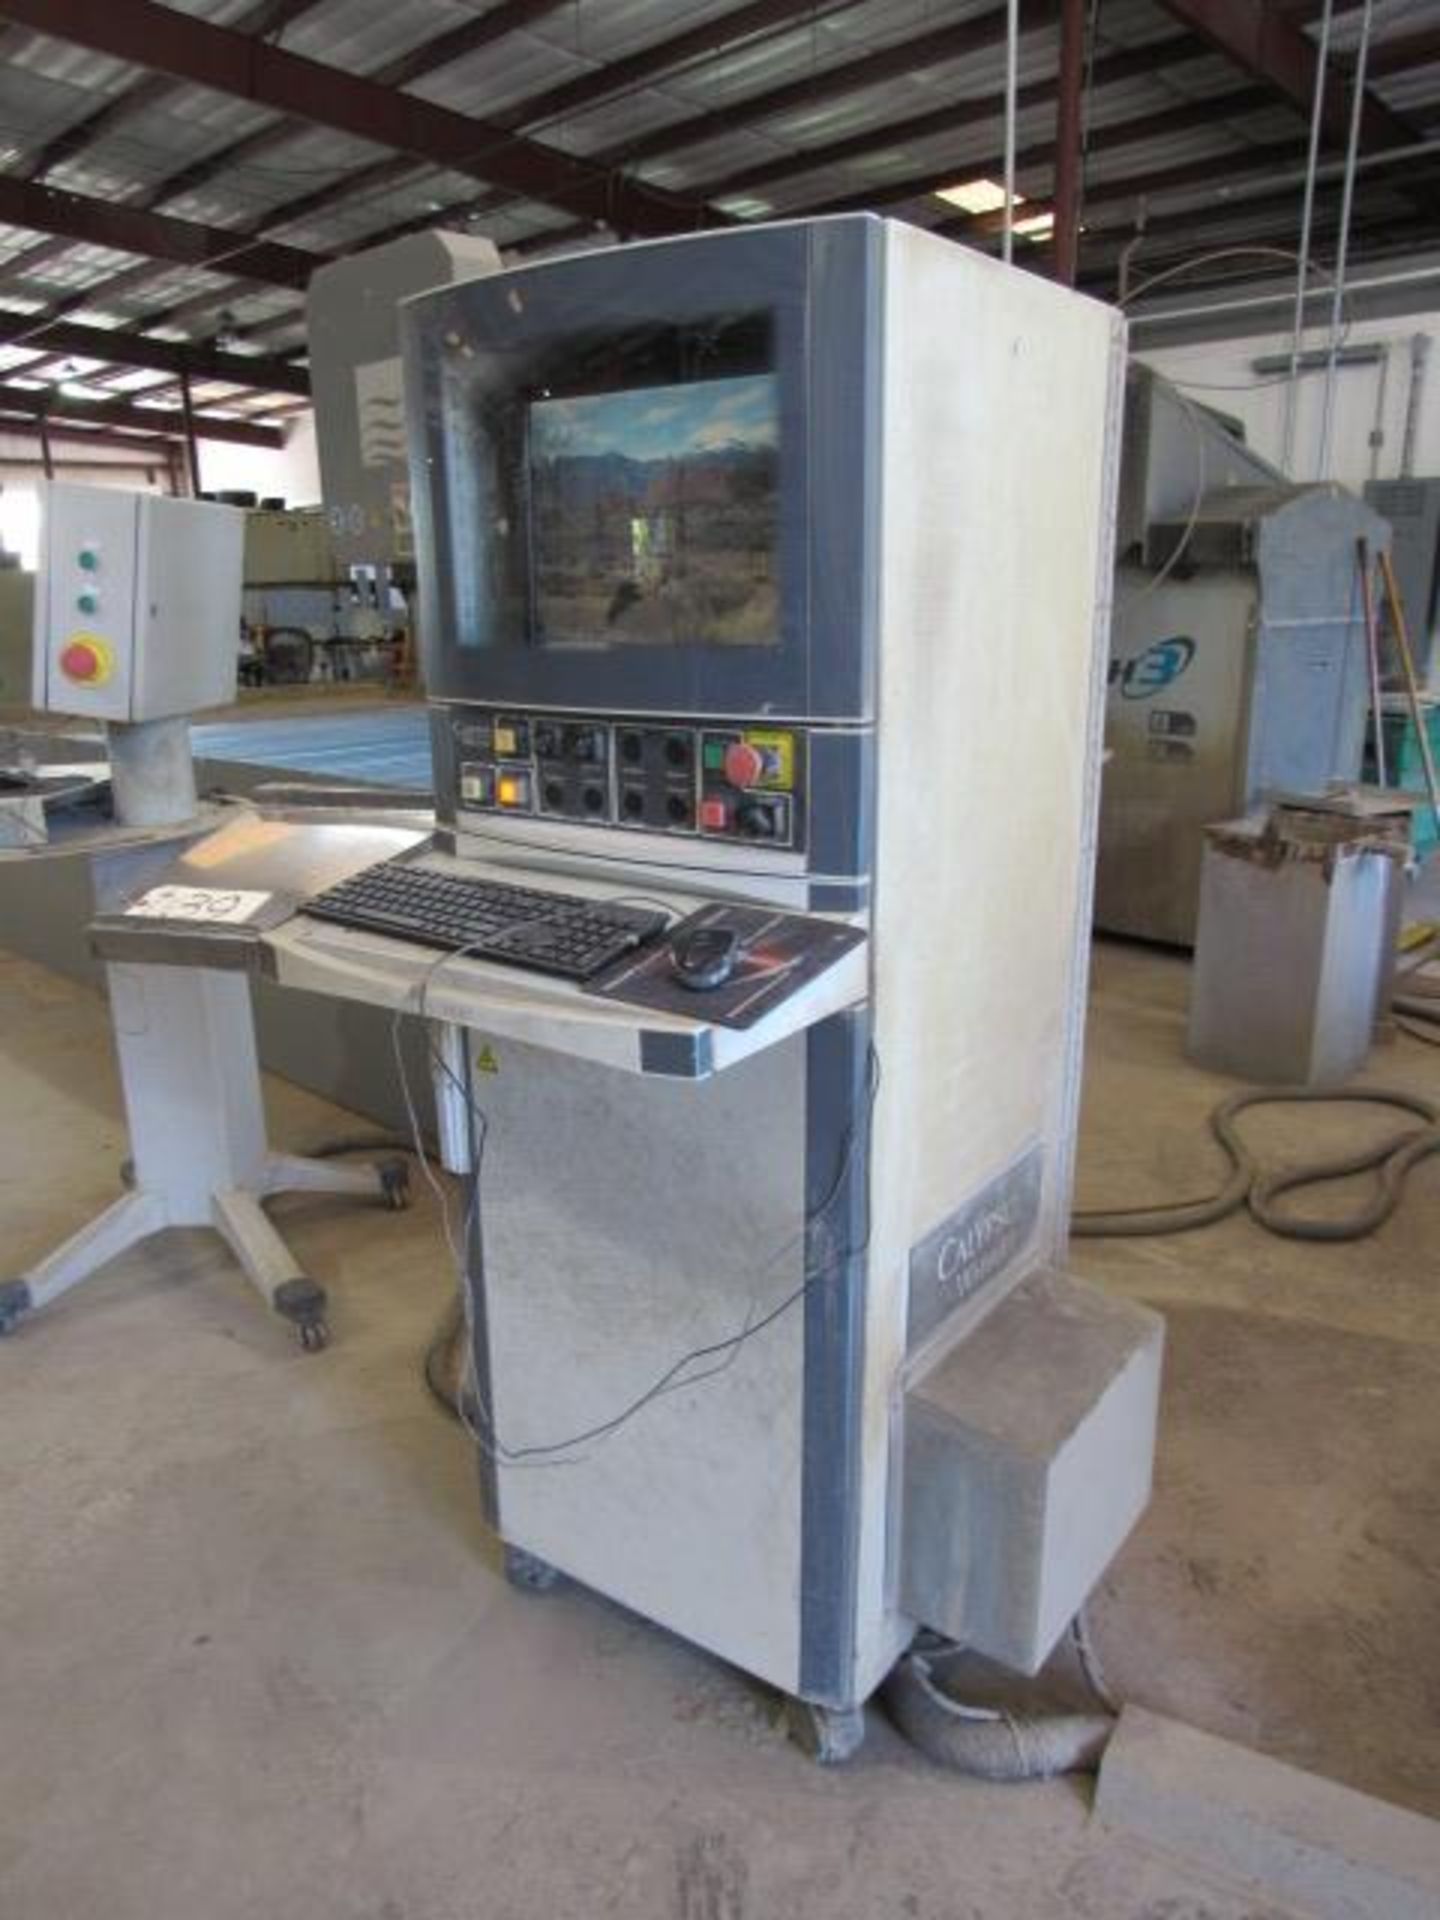 Calypso Hammerhead 60,000 PSI 3-Axis CNC Water Jet - Image 10 of 11